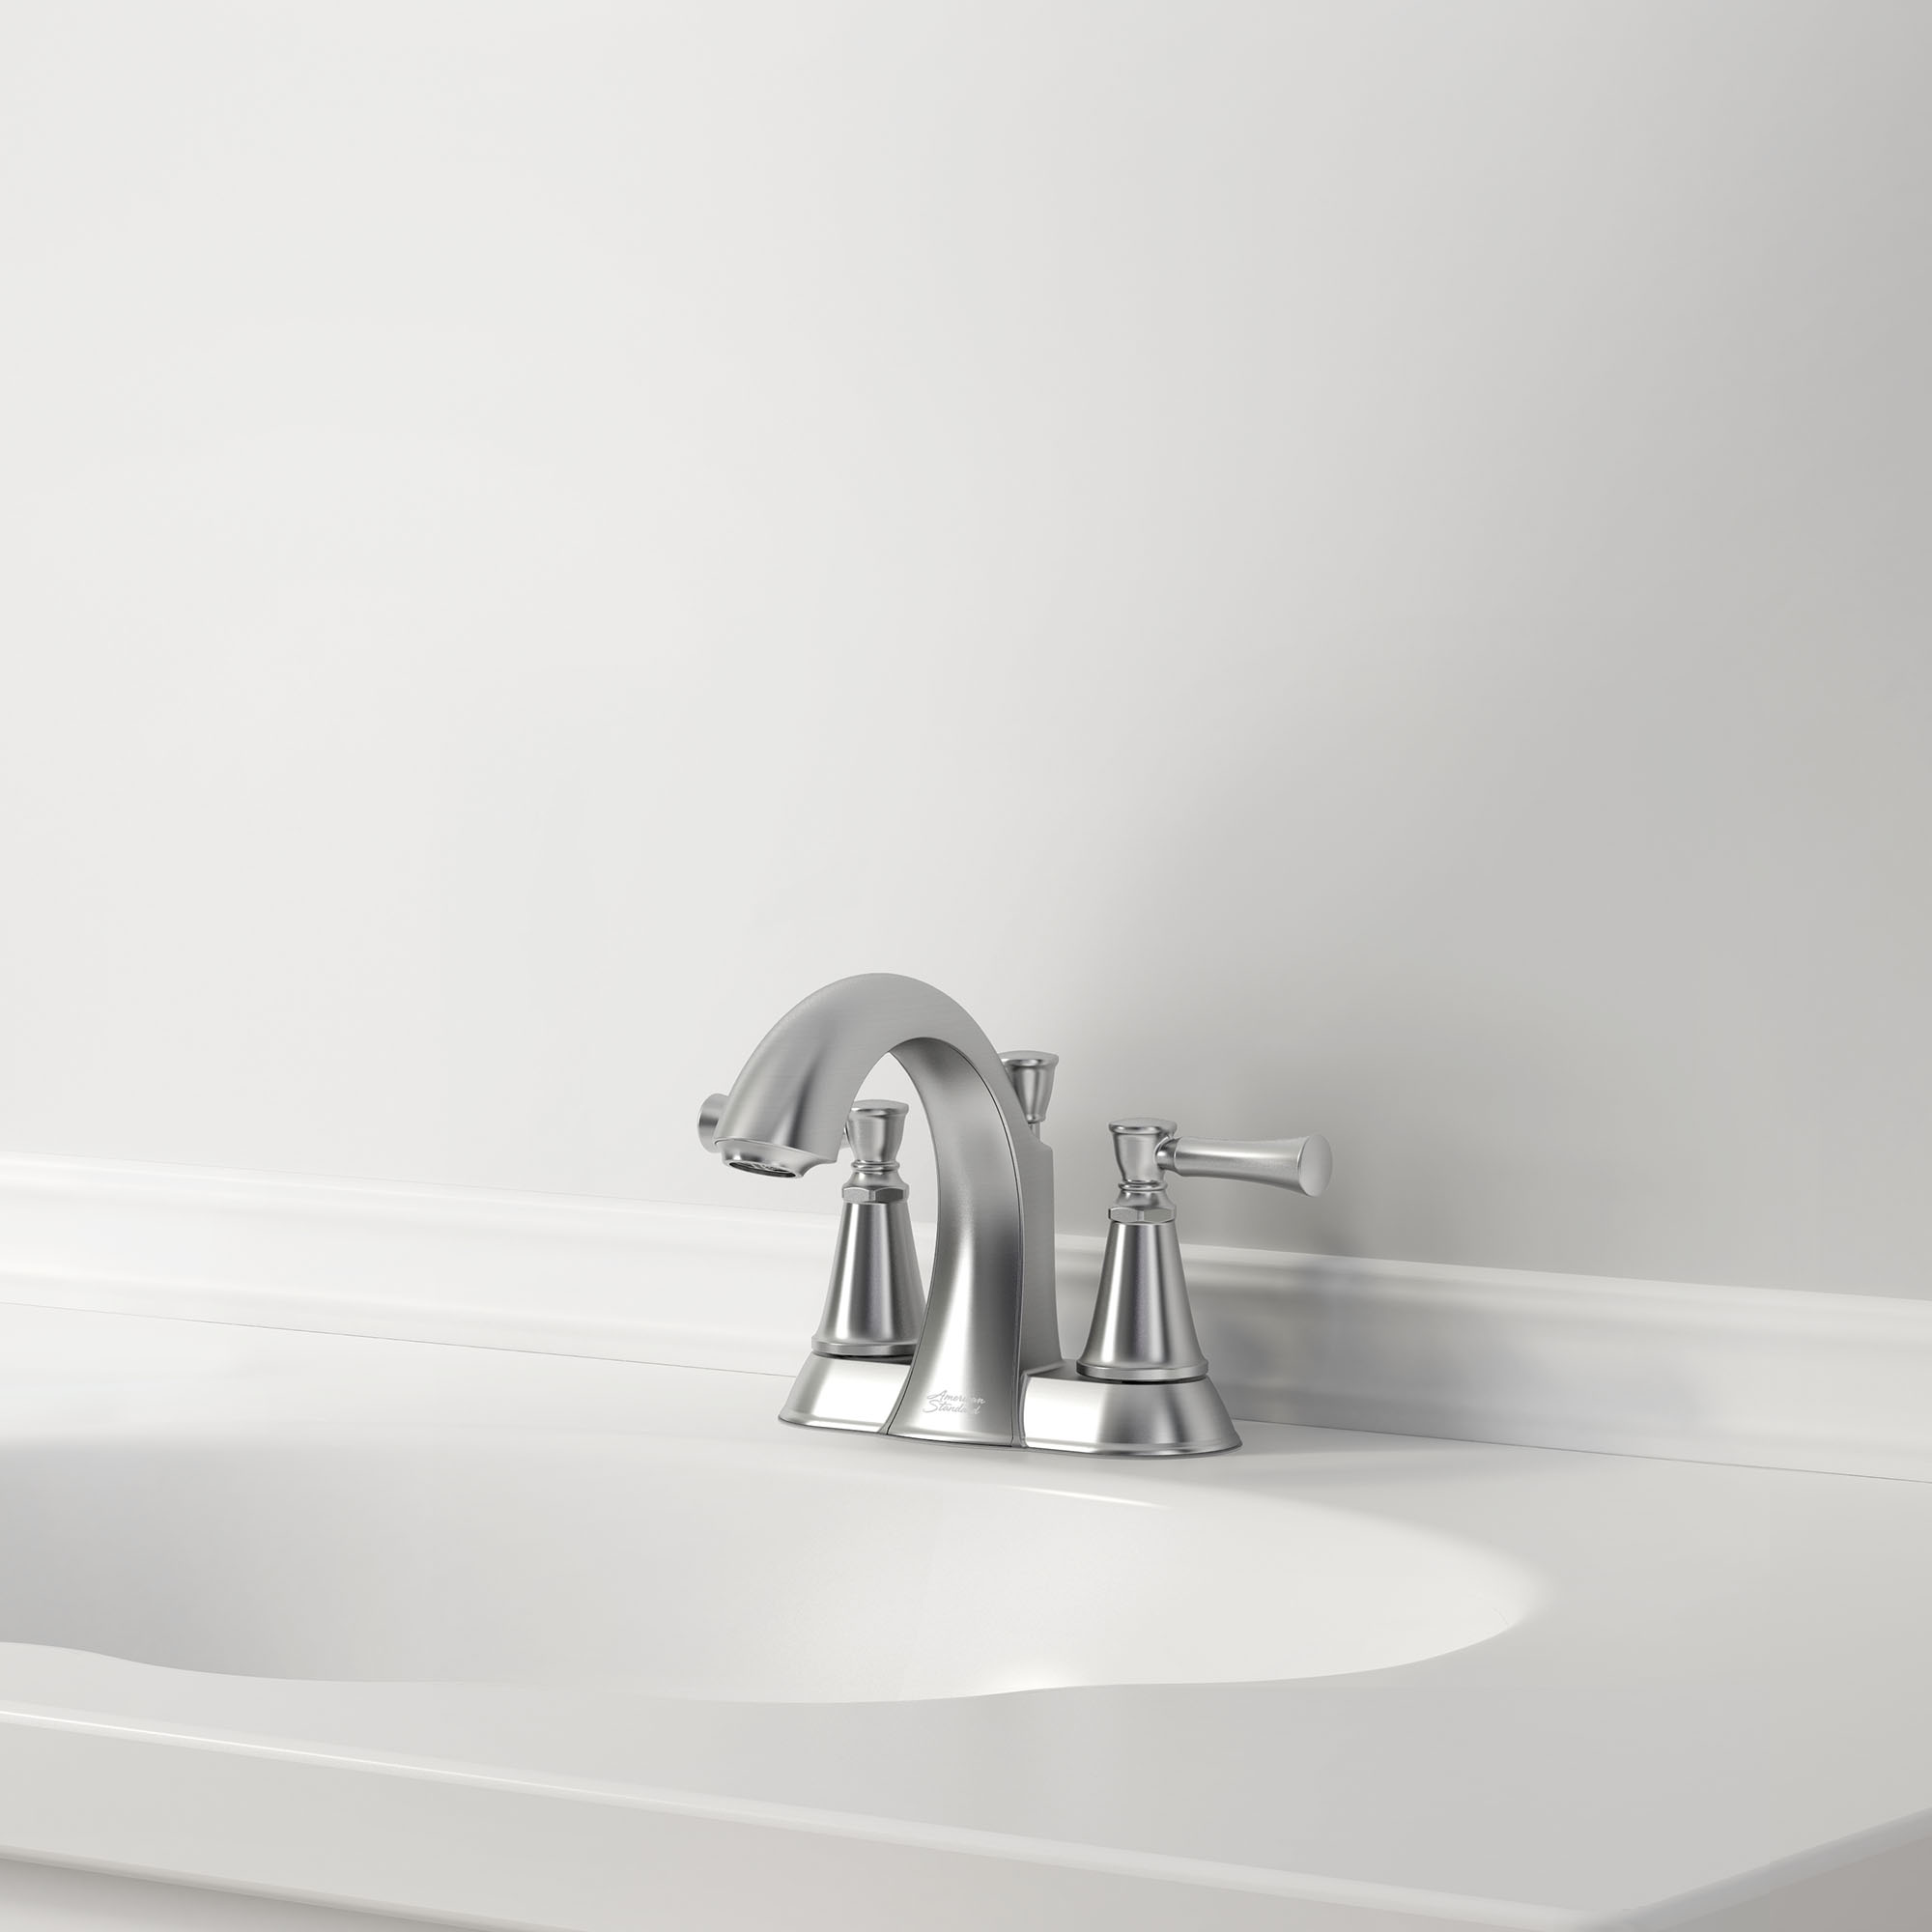 Chancellor® 4-Inch Centerset 2-Handle Bathroom Faucet 1.2 gpm/4.5 L/min With Lever Handles